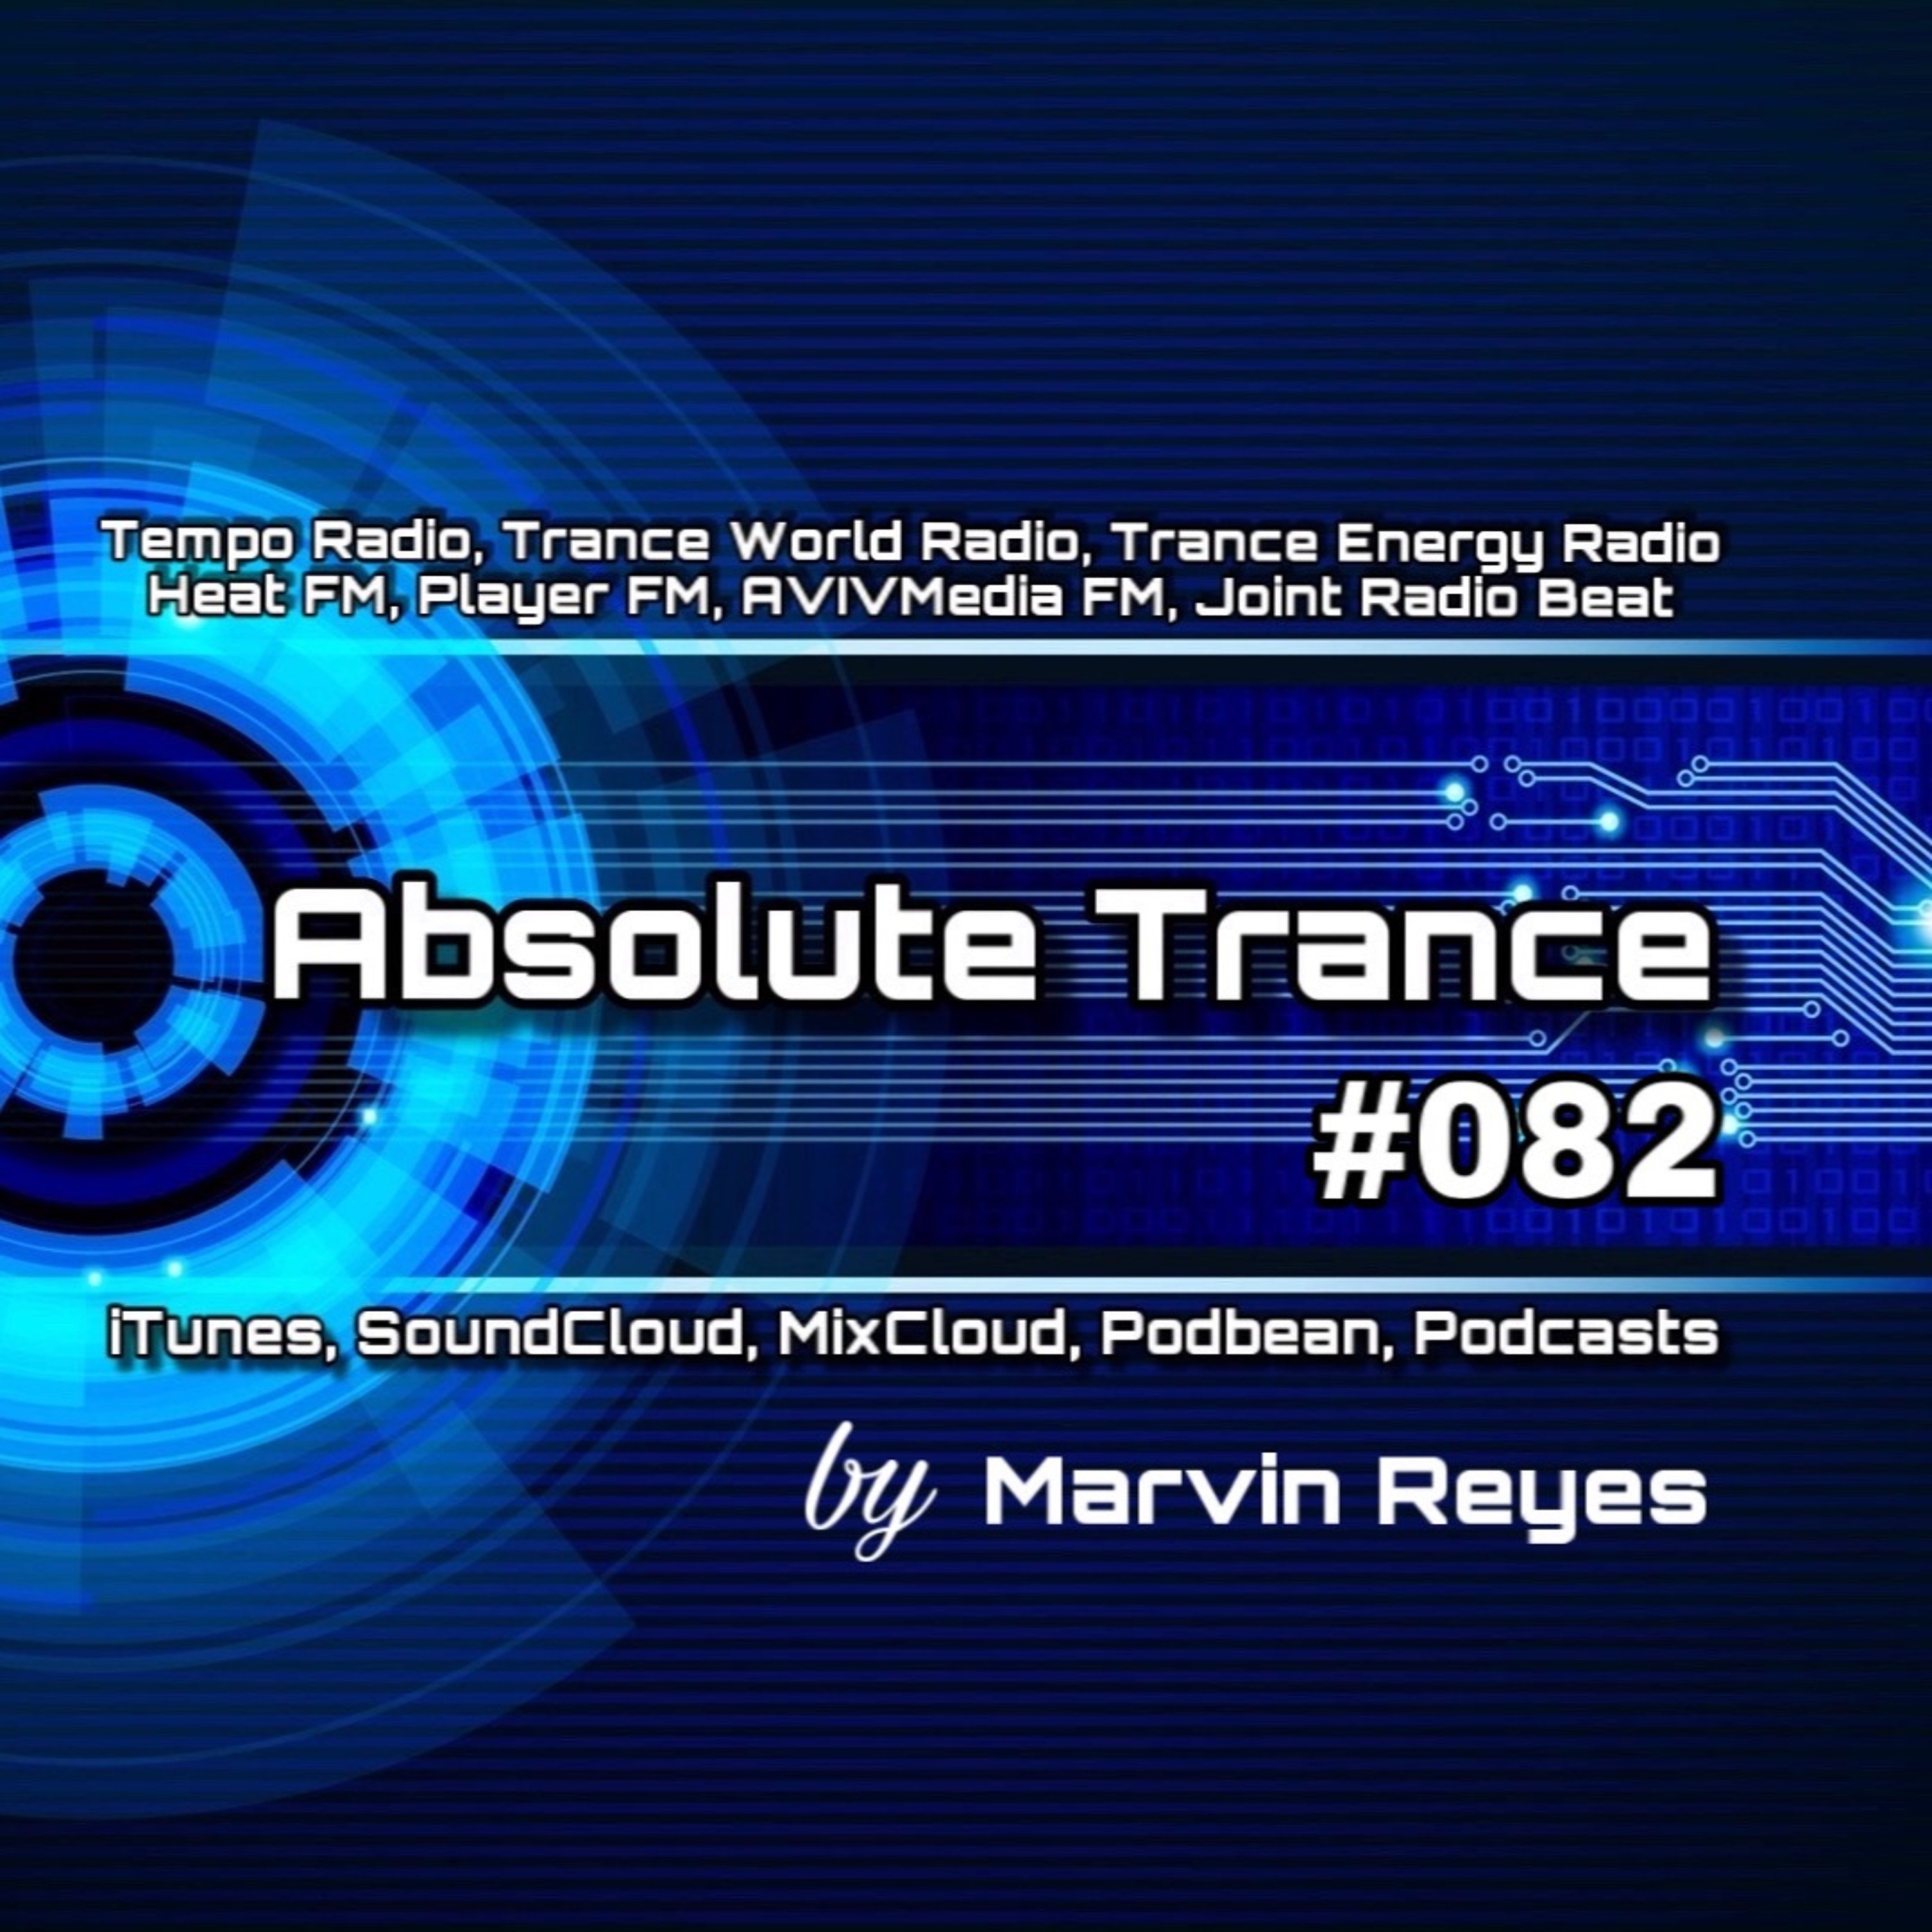 Absolute Trance #082